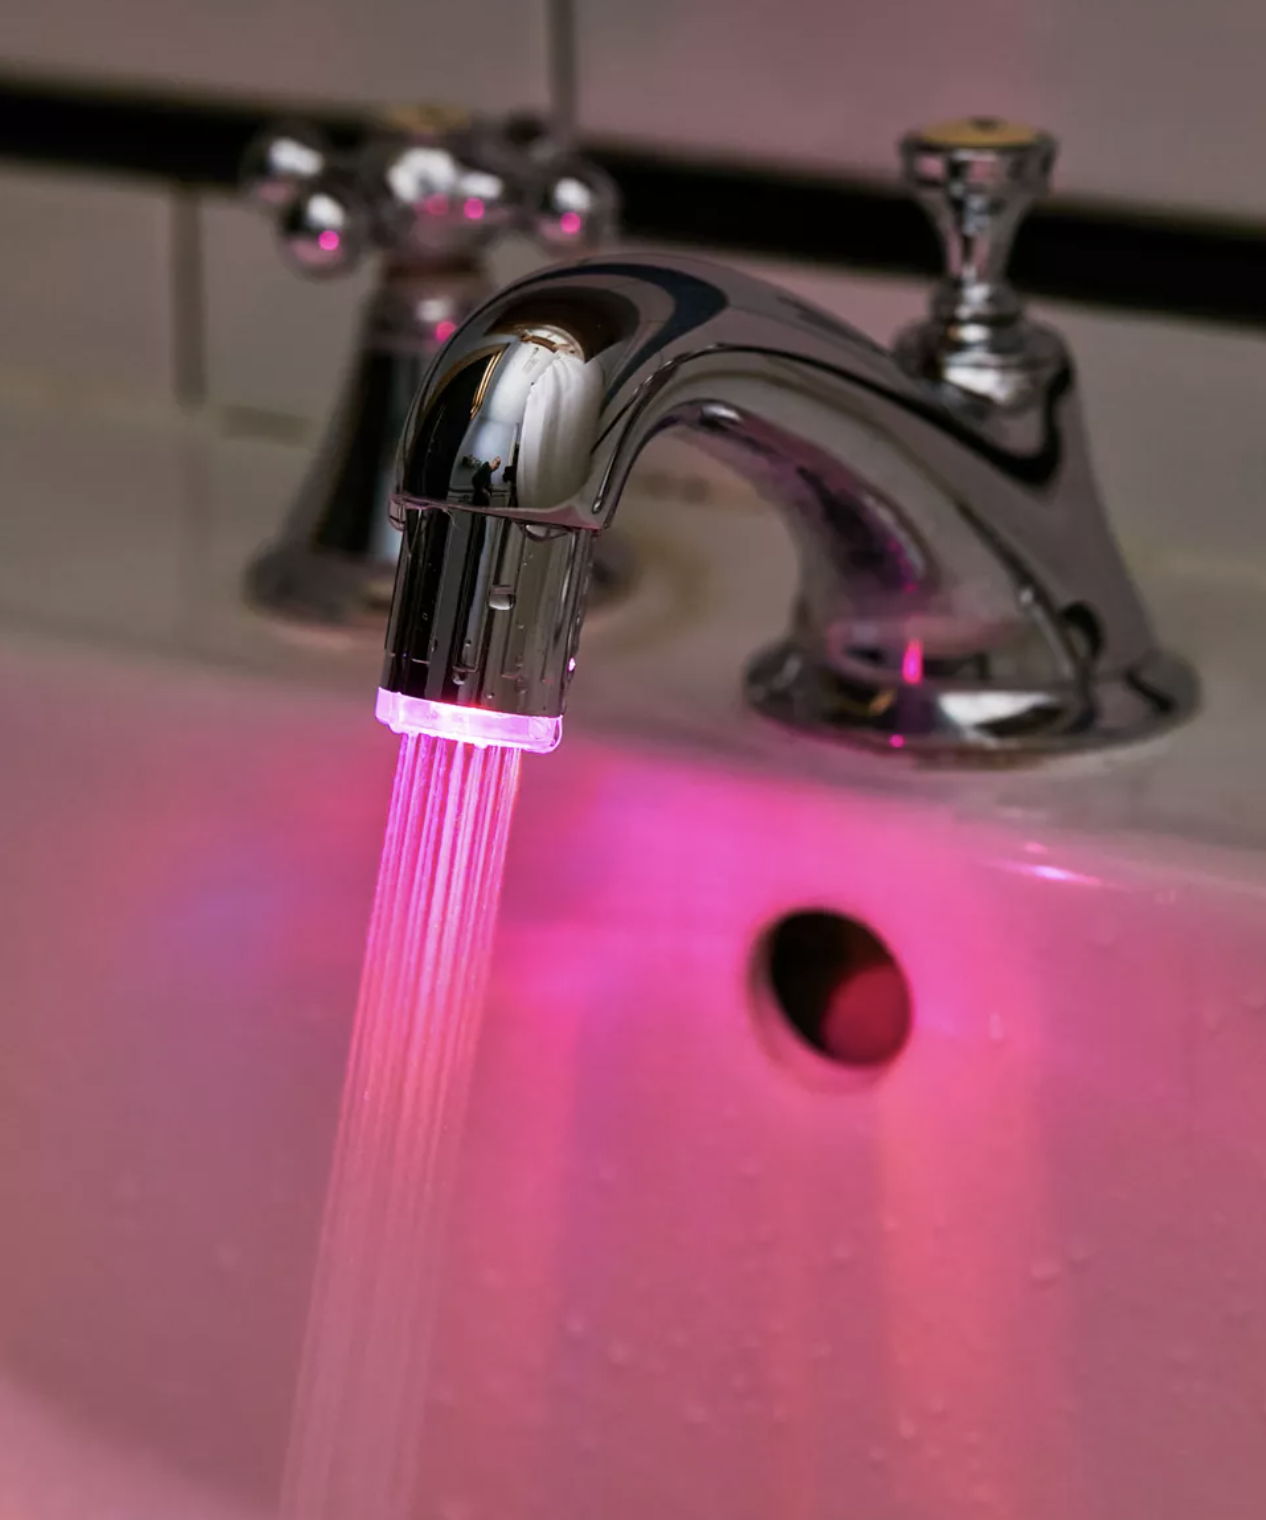 The glowing light on a faucet with water coming out of it